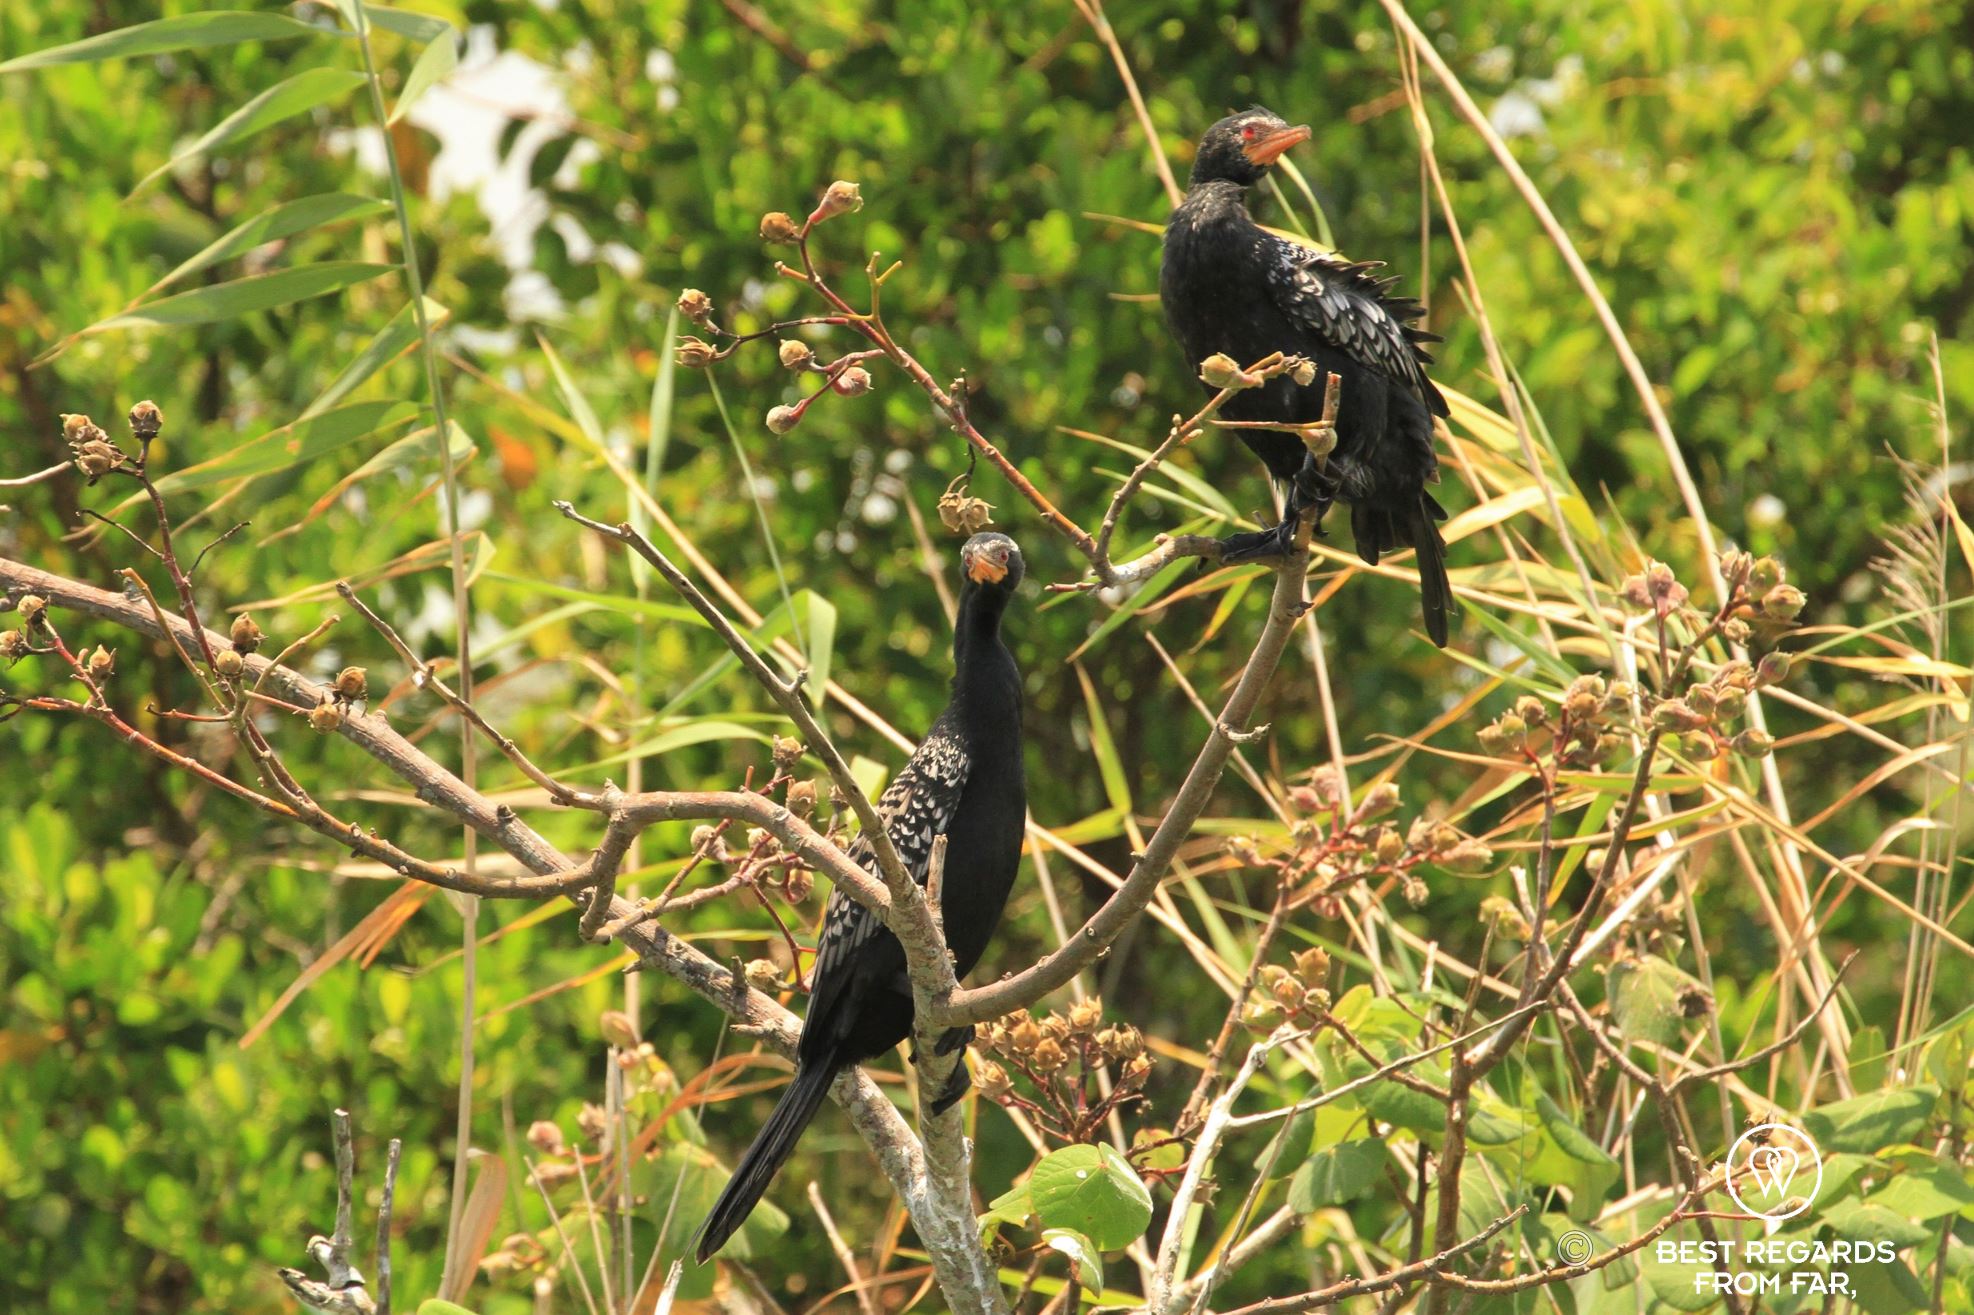 Cormorants in a tree, Kosi Bay, South Africa